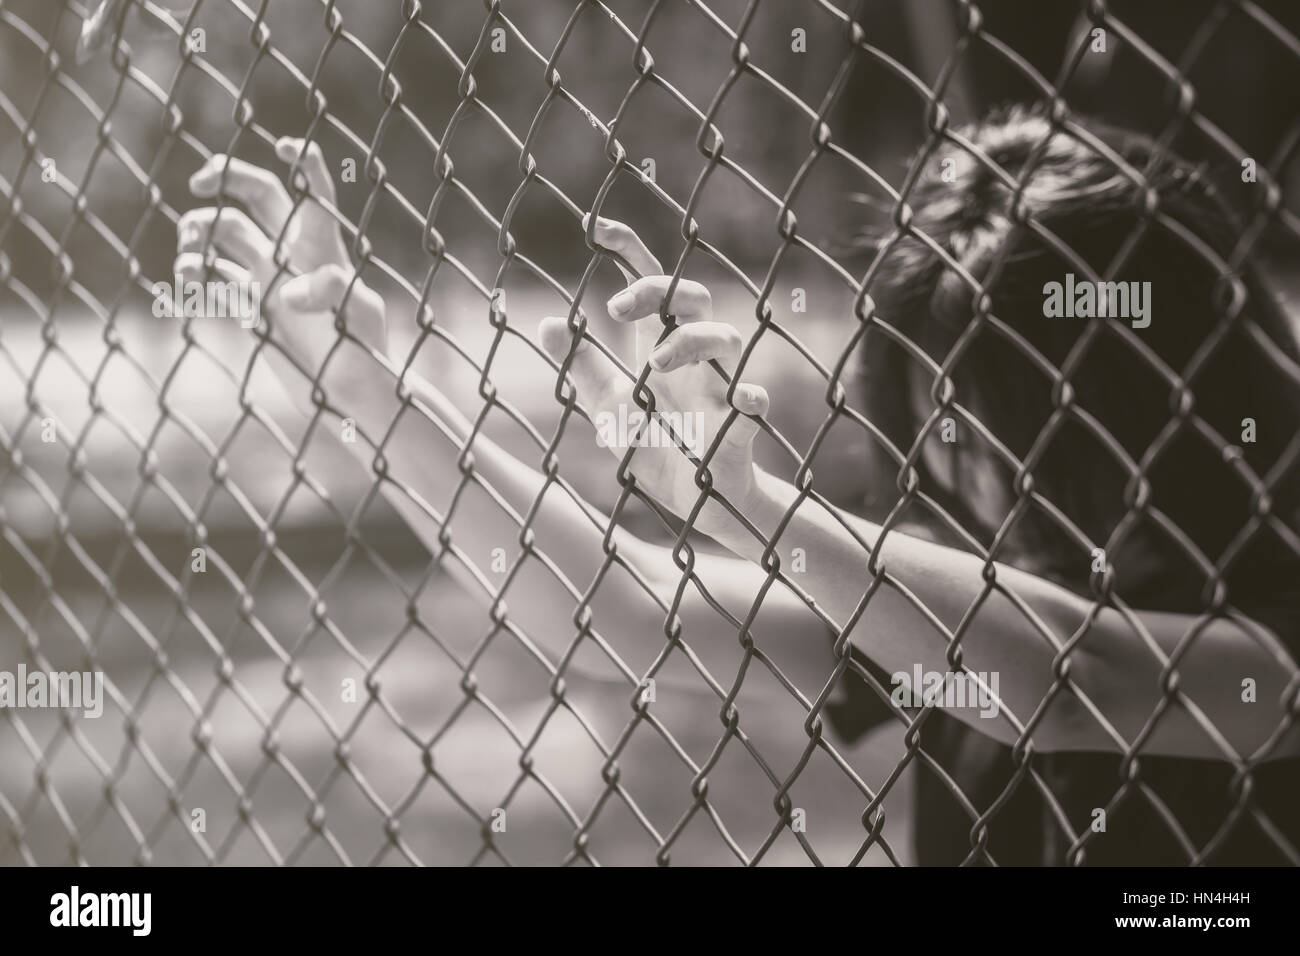 teen behide the cage or woman jailed, unhappy girl hand sad hopeless at fence prison in jail, no free and freedom struggle teen concept. Stock Photo